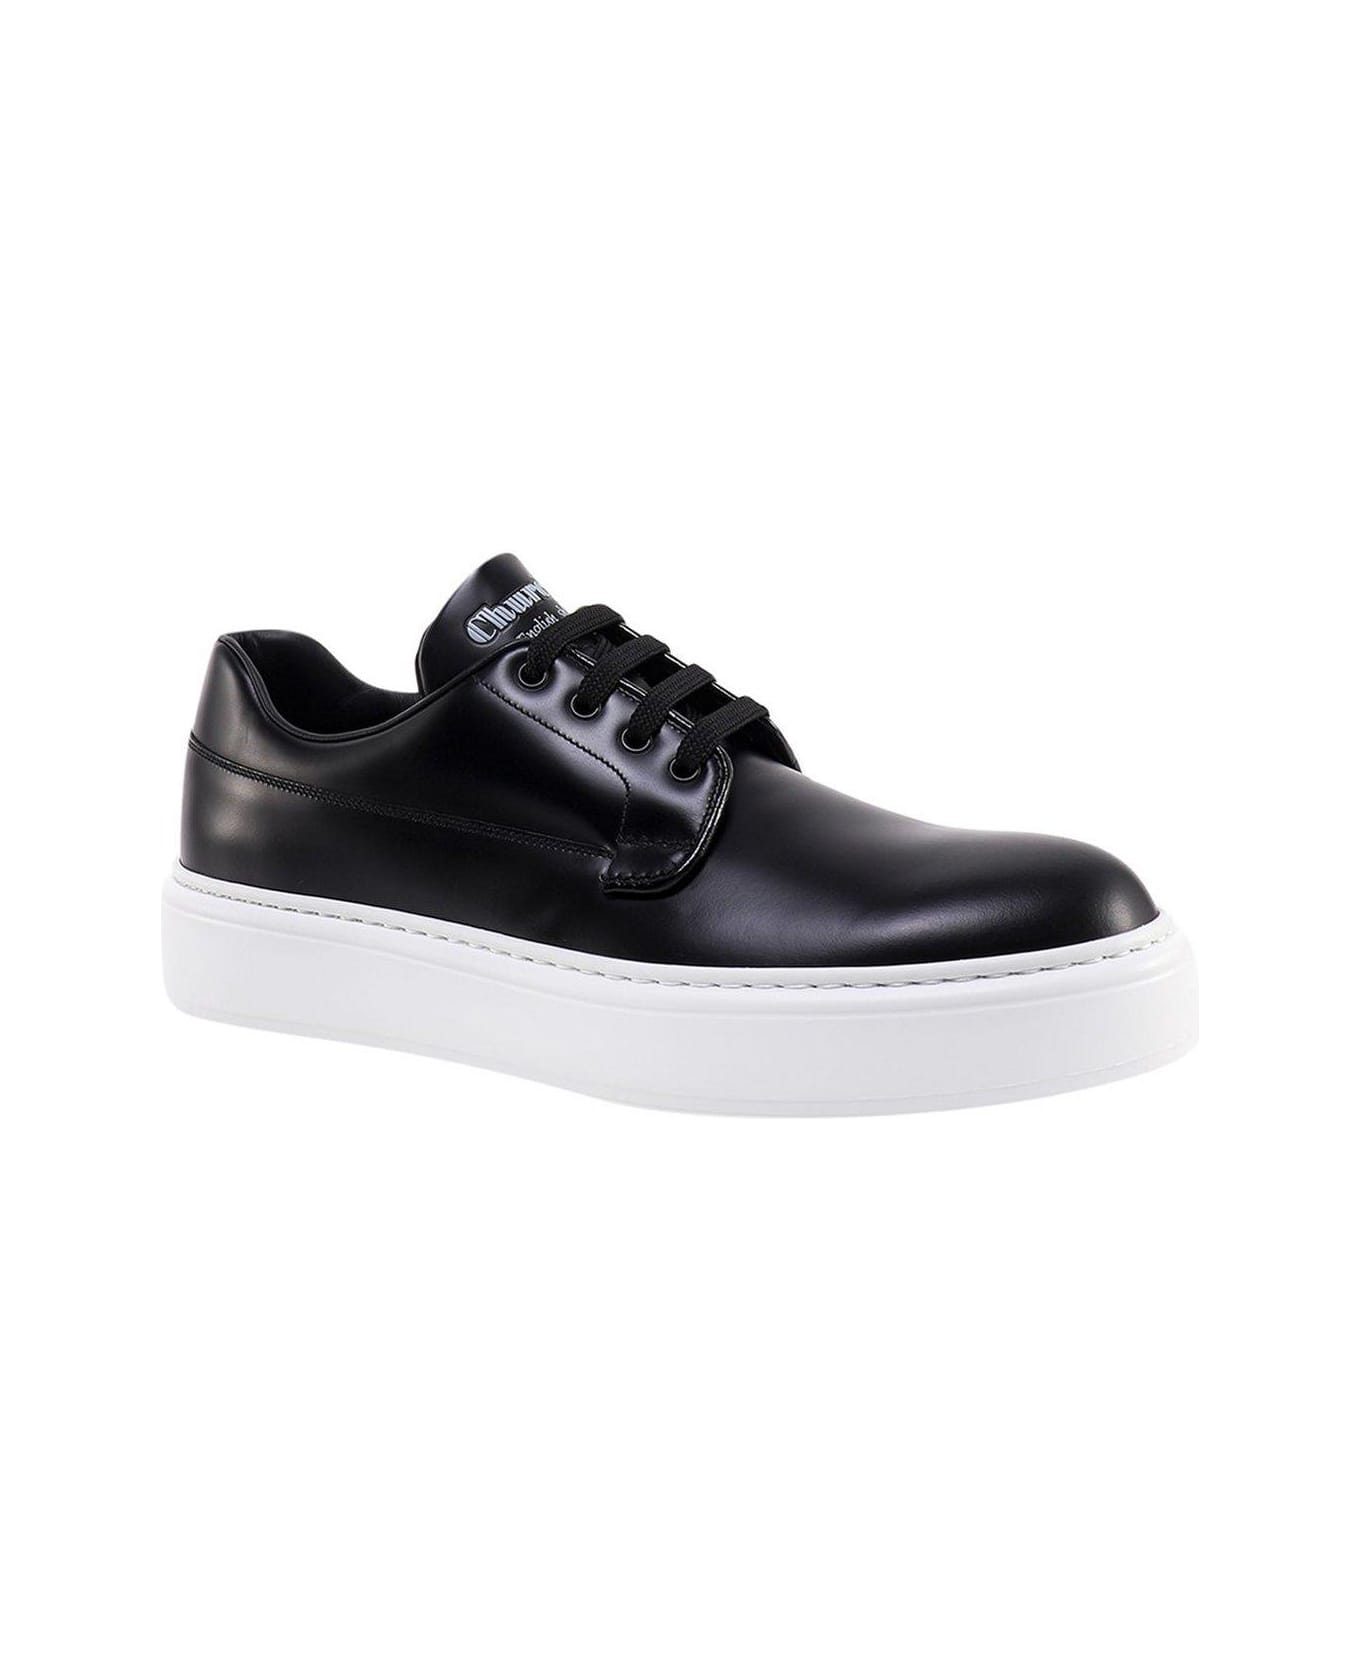 Church's Lace-up Derby Shoes - Nero bianco